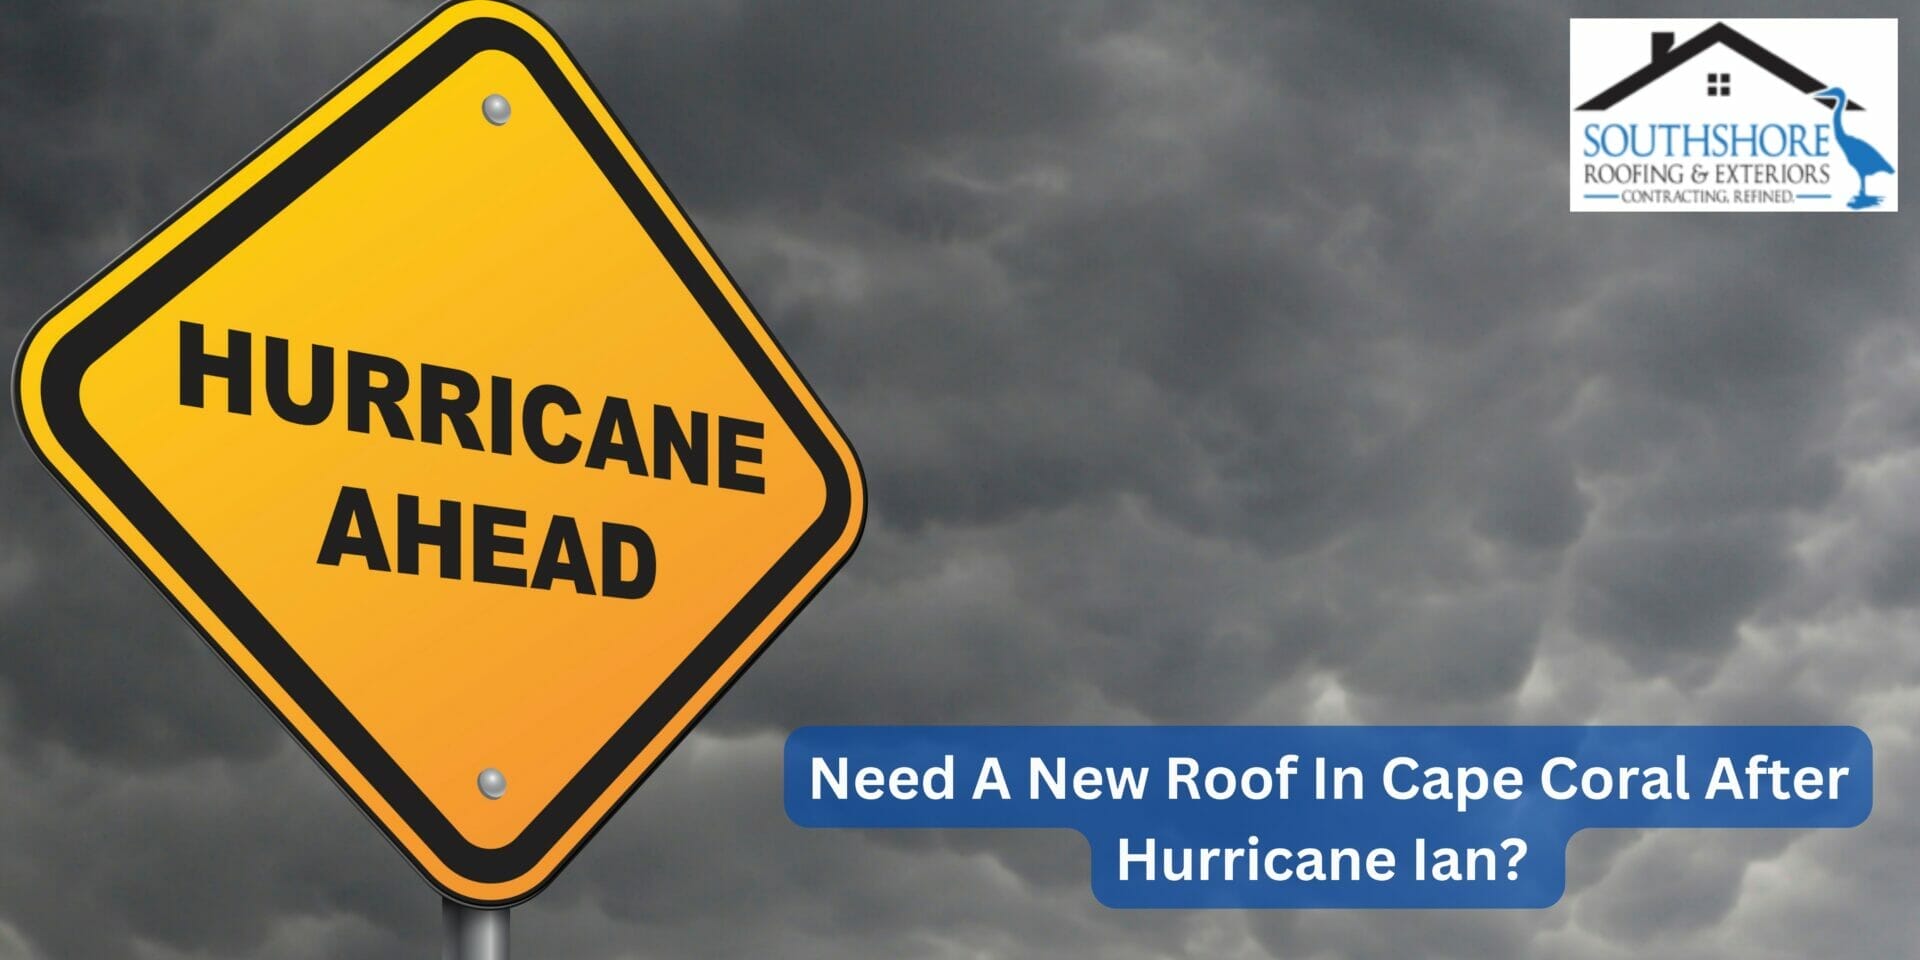 Need A New Roof In Cape Coral After Hurricane Ian? We Can Help!